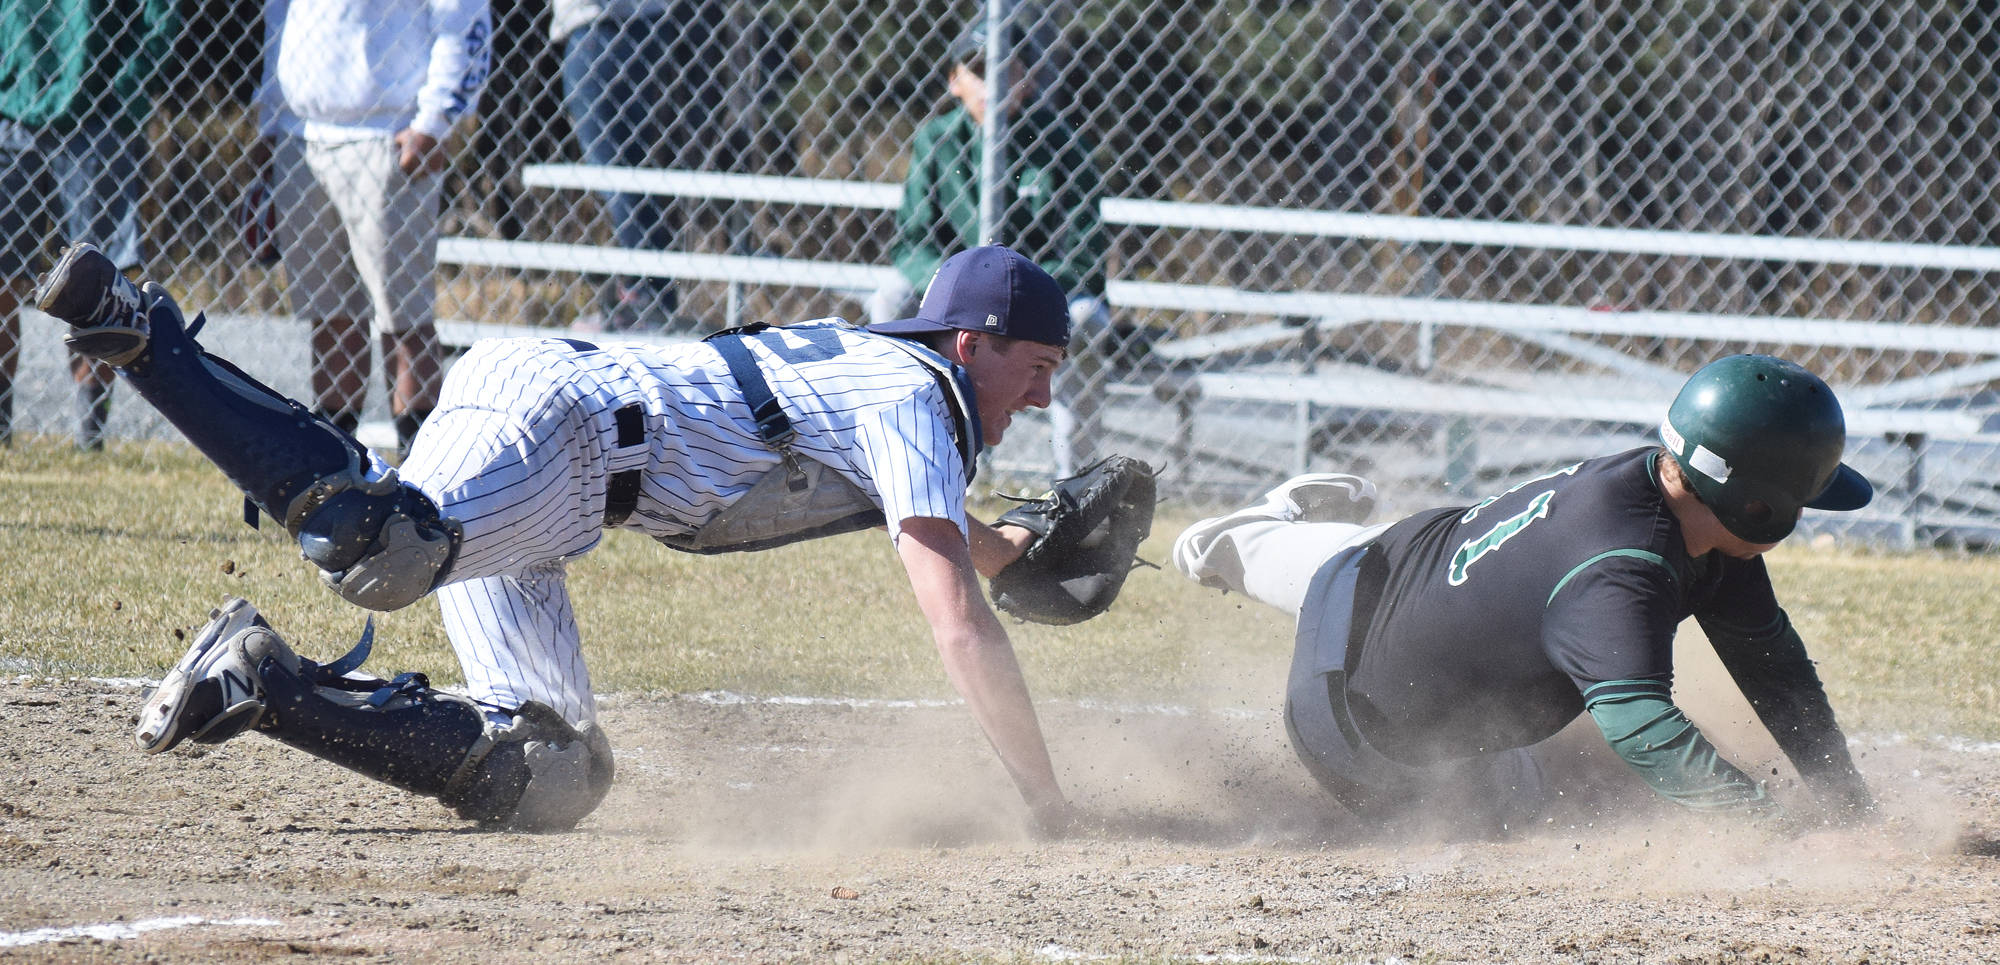 Soldotna catcher Cody Quelland (left) tags out Colony’s Zach Satterly to end the top of the fifth inning Tuesday afternoon at the Soldotna baseball fields. (Photo by Joey Klecka/Peninsula Clarion)